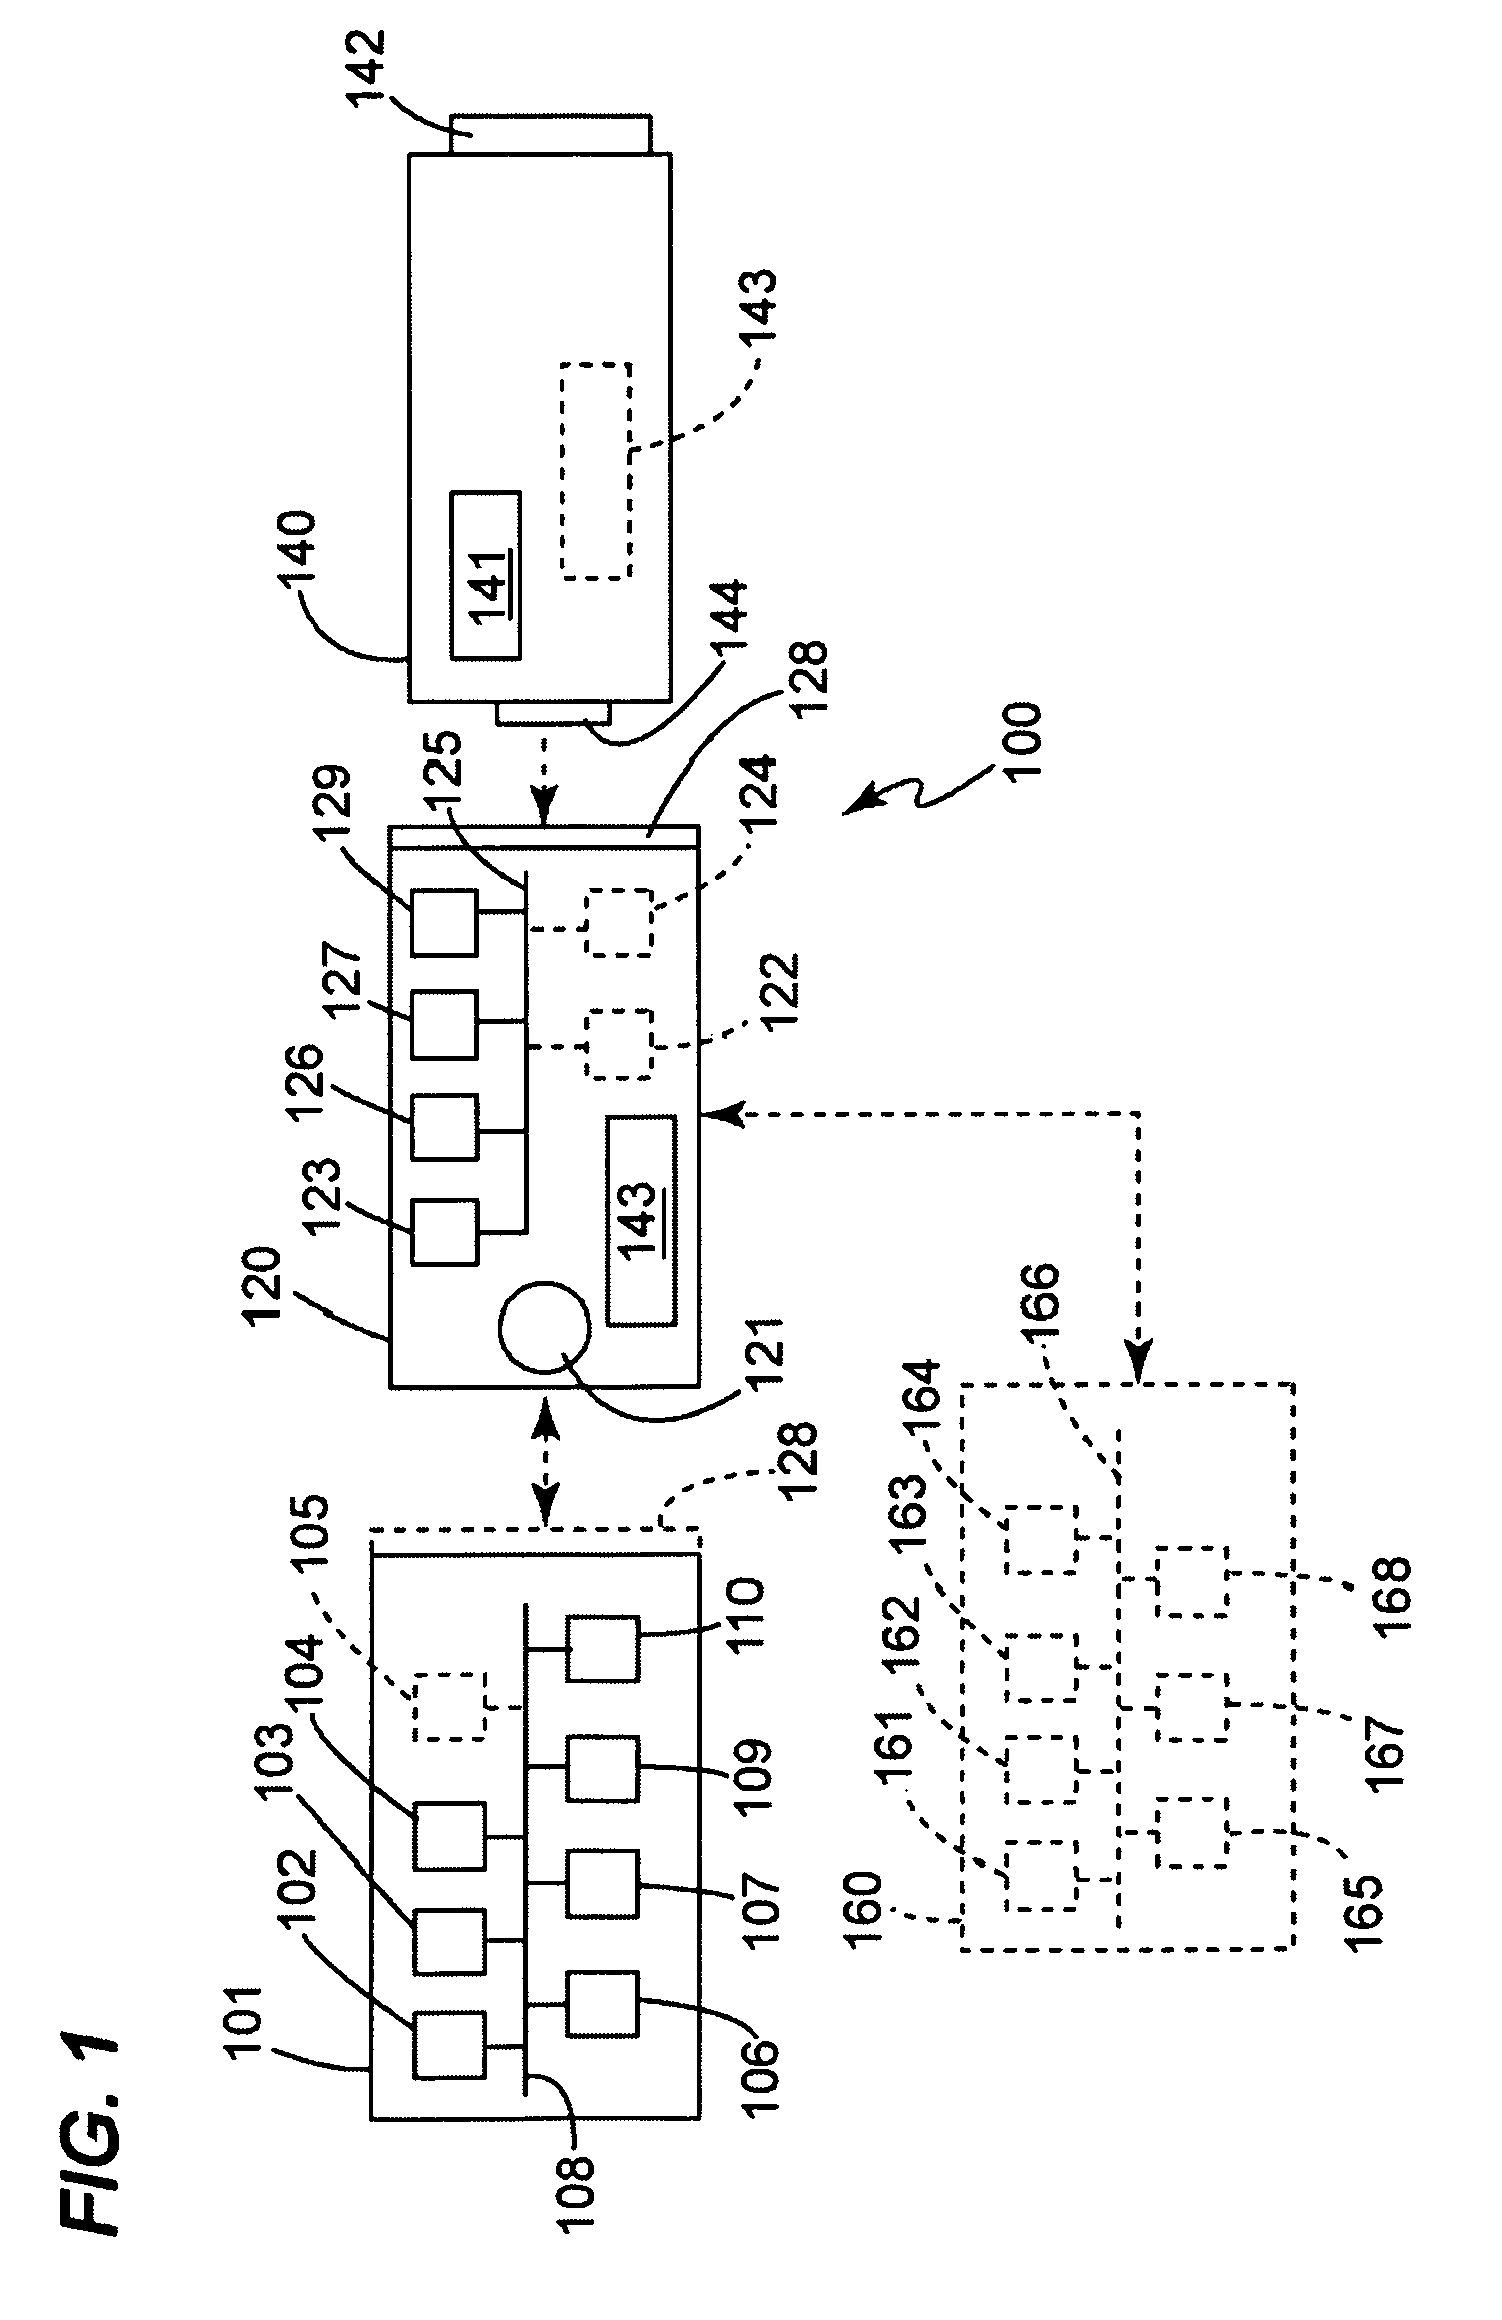 System and method for improved biodetection